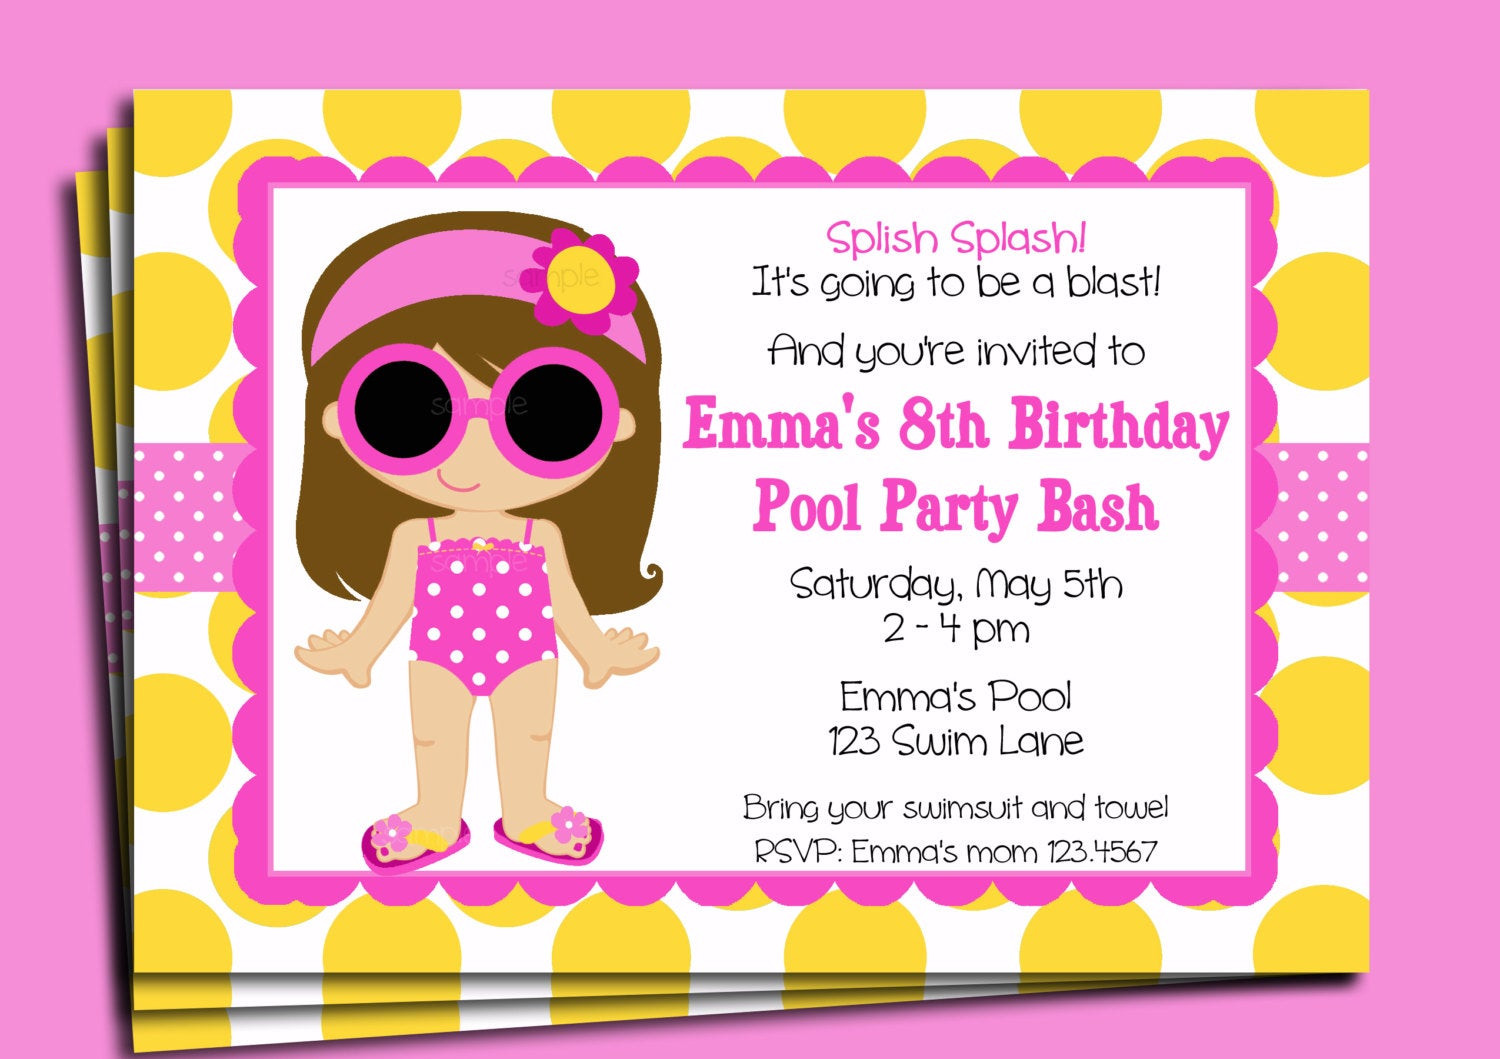 Pool Party Invitation Wording Ideas
 Pool Party Invitation Printable or Printed with FREE SHIPPING